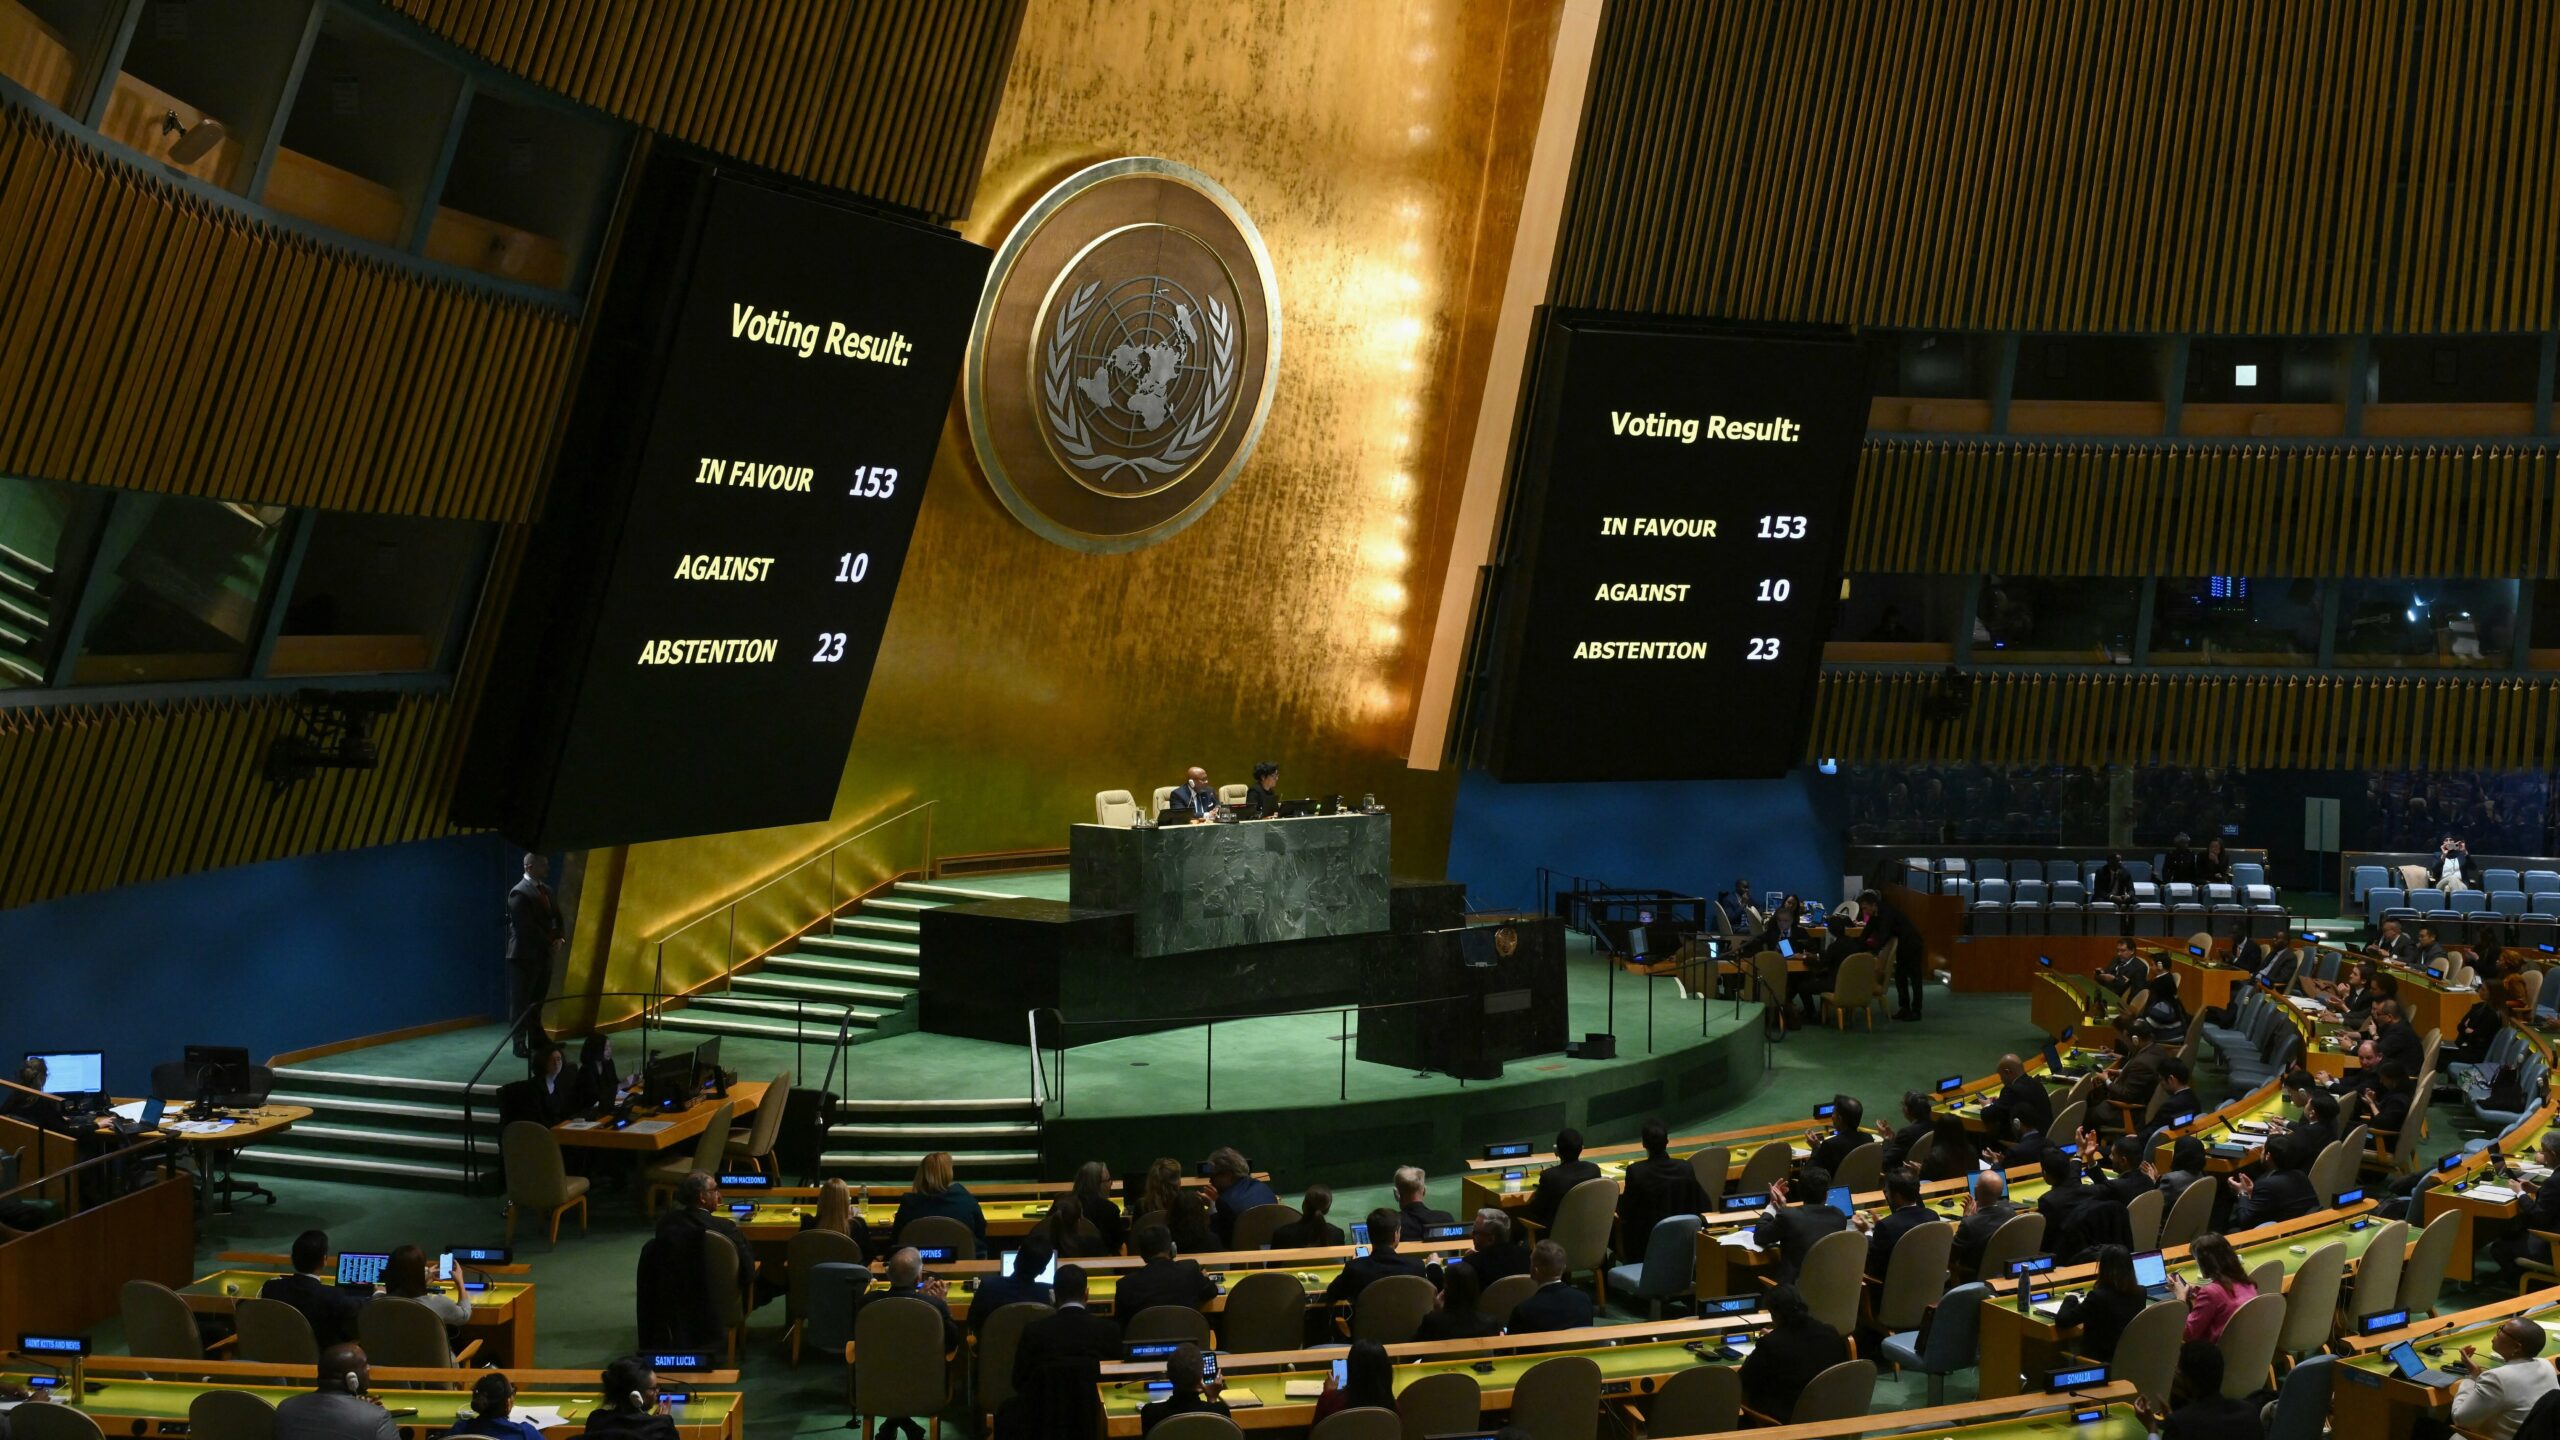 A general view shows voting results during a United Nations General Assembly meeting to vote on a non-binding resolution